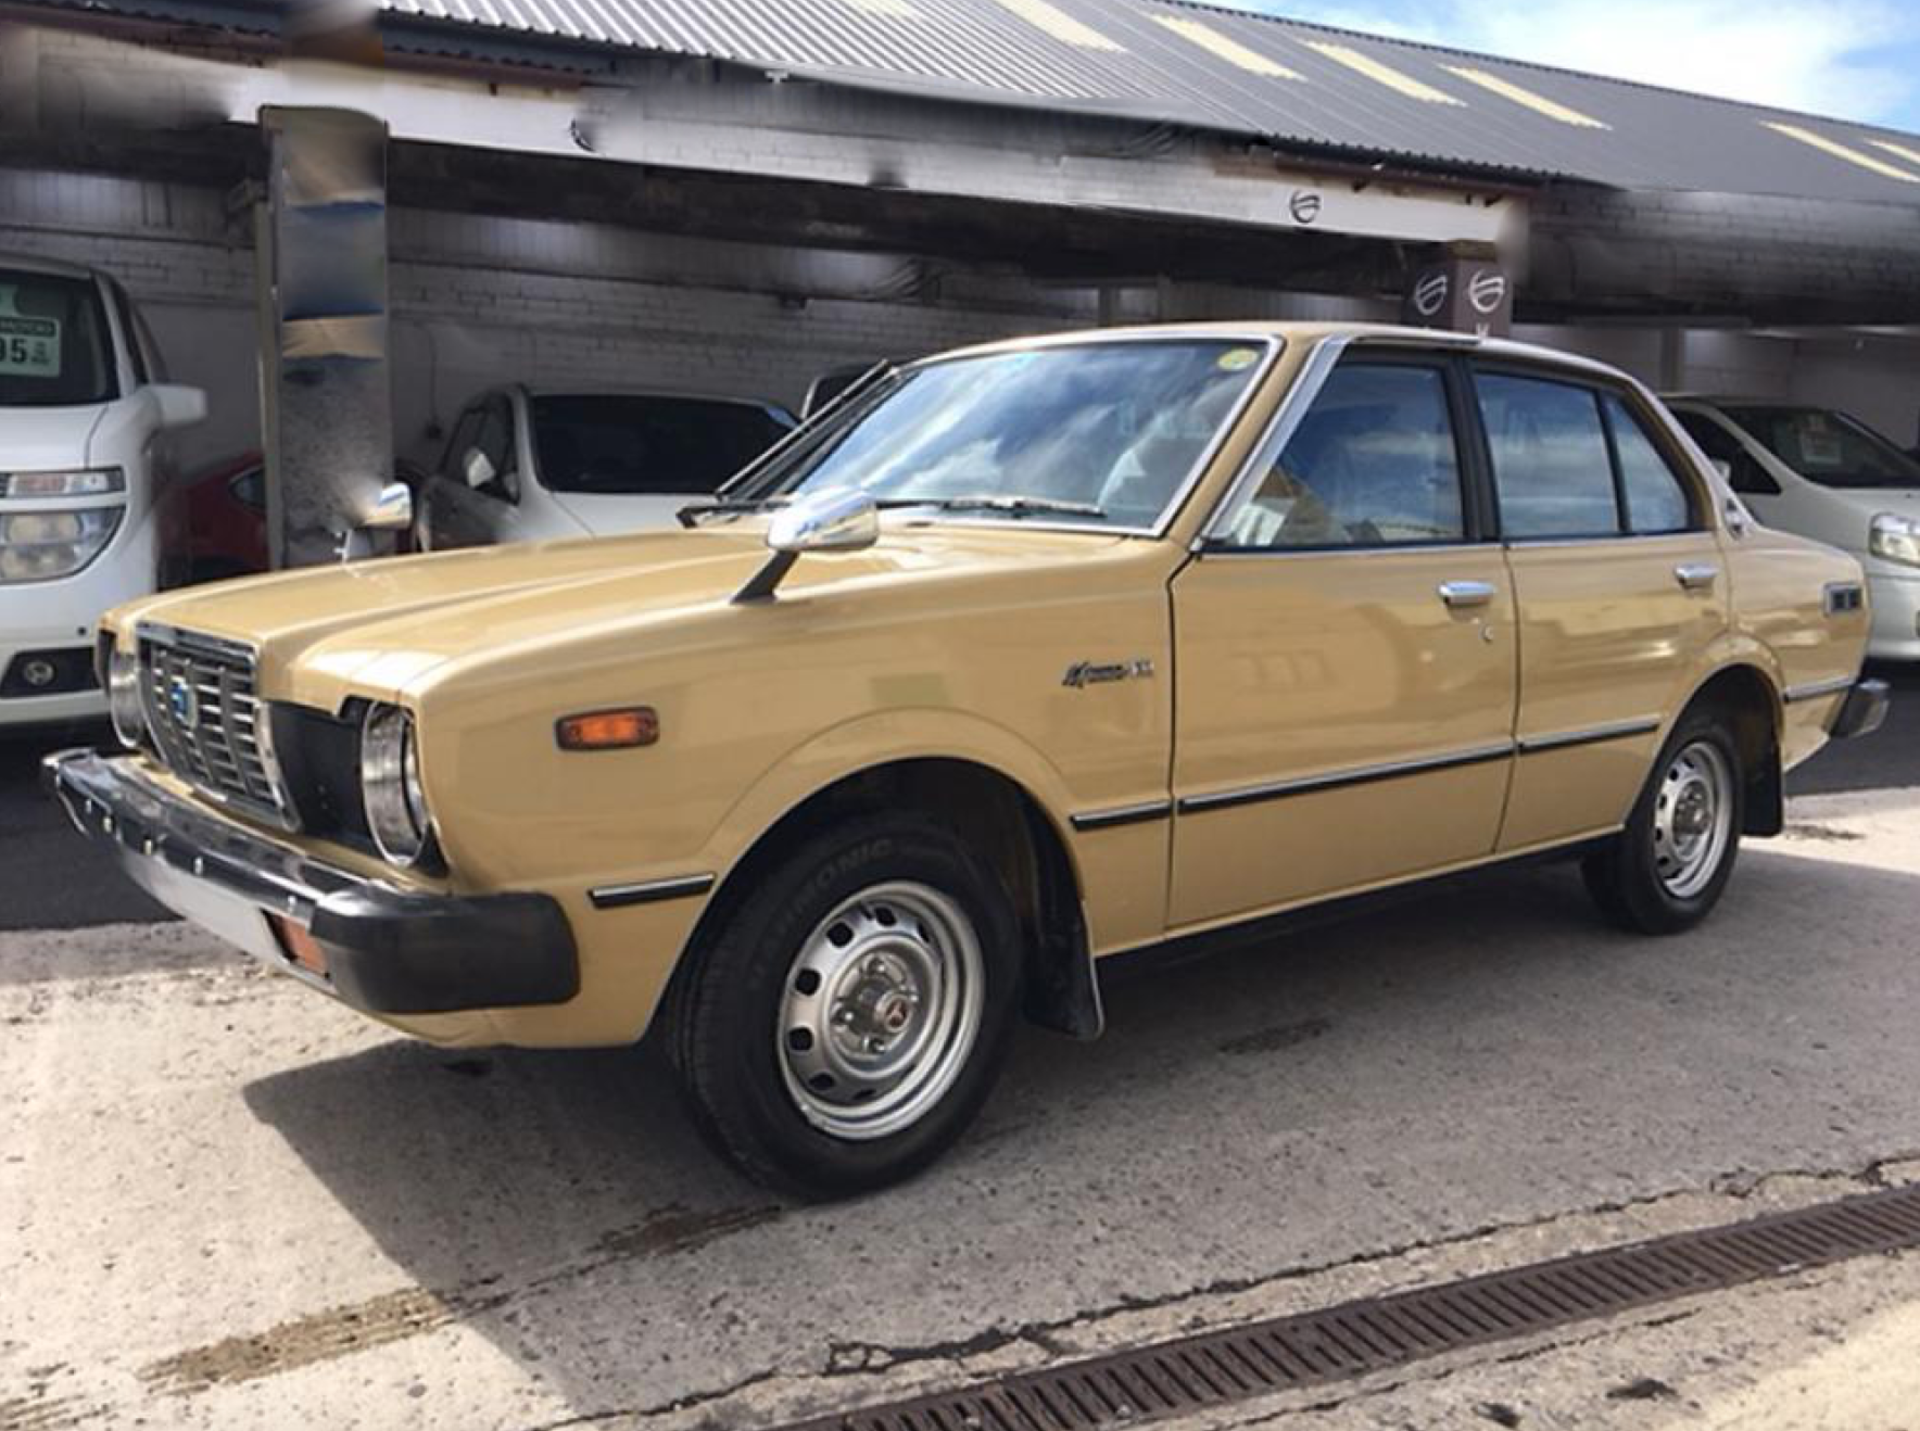 1979 Toyota Corolla Sprinter From Japan - Image 2 of 35